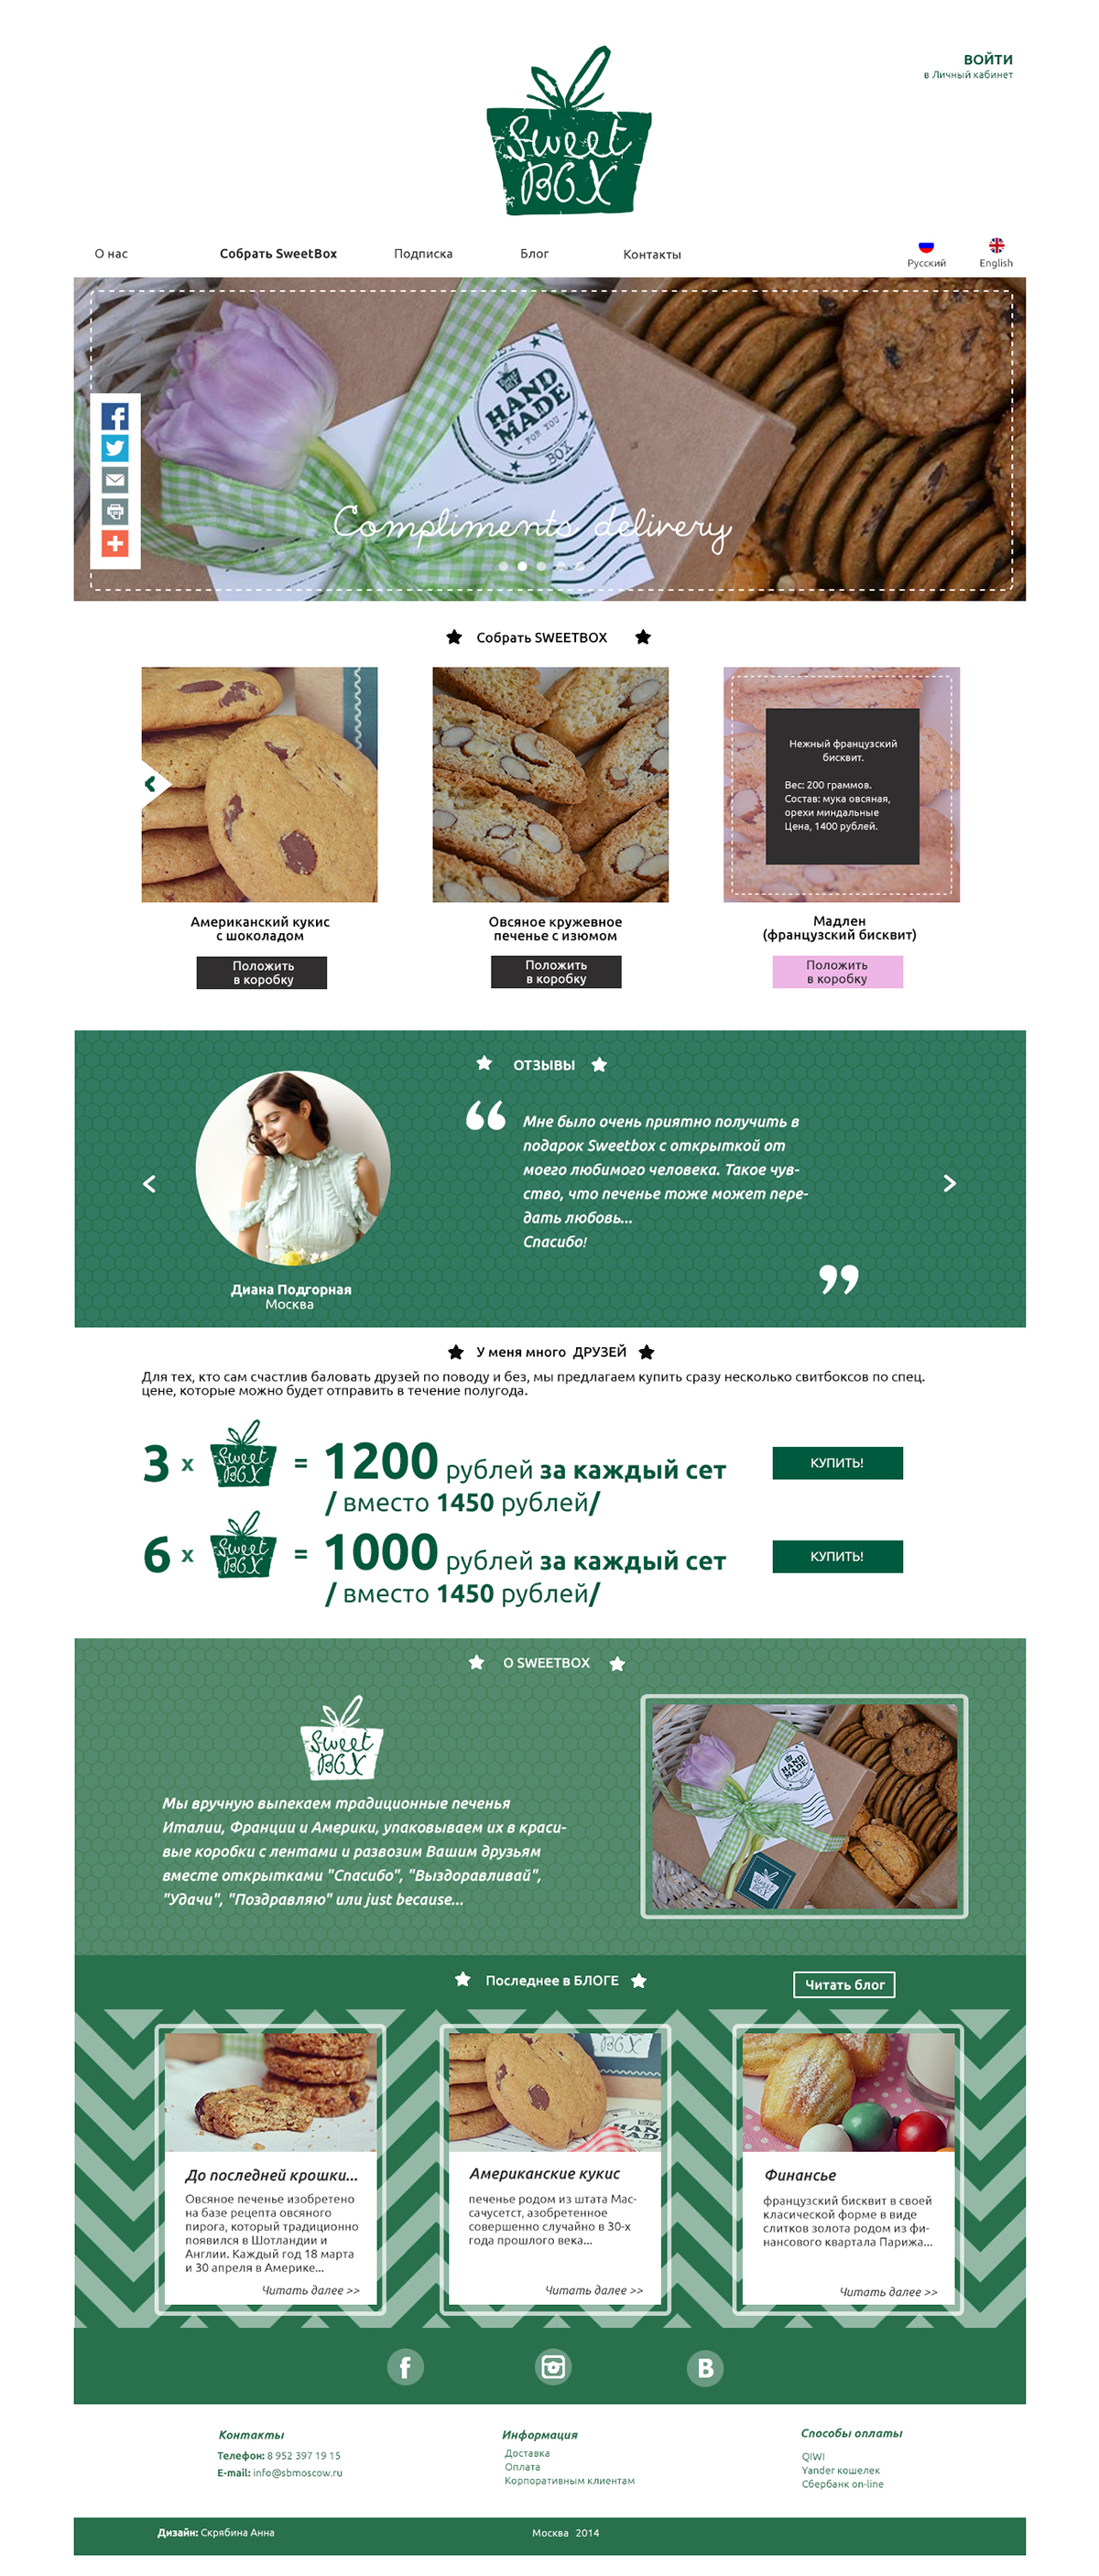 Sweets landing page sweetbox